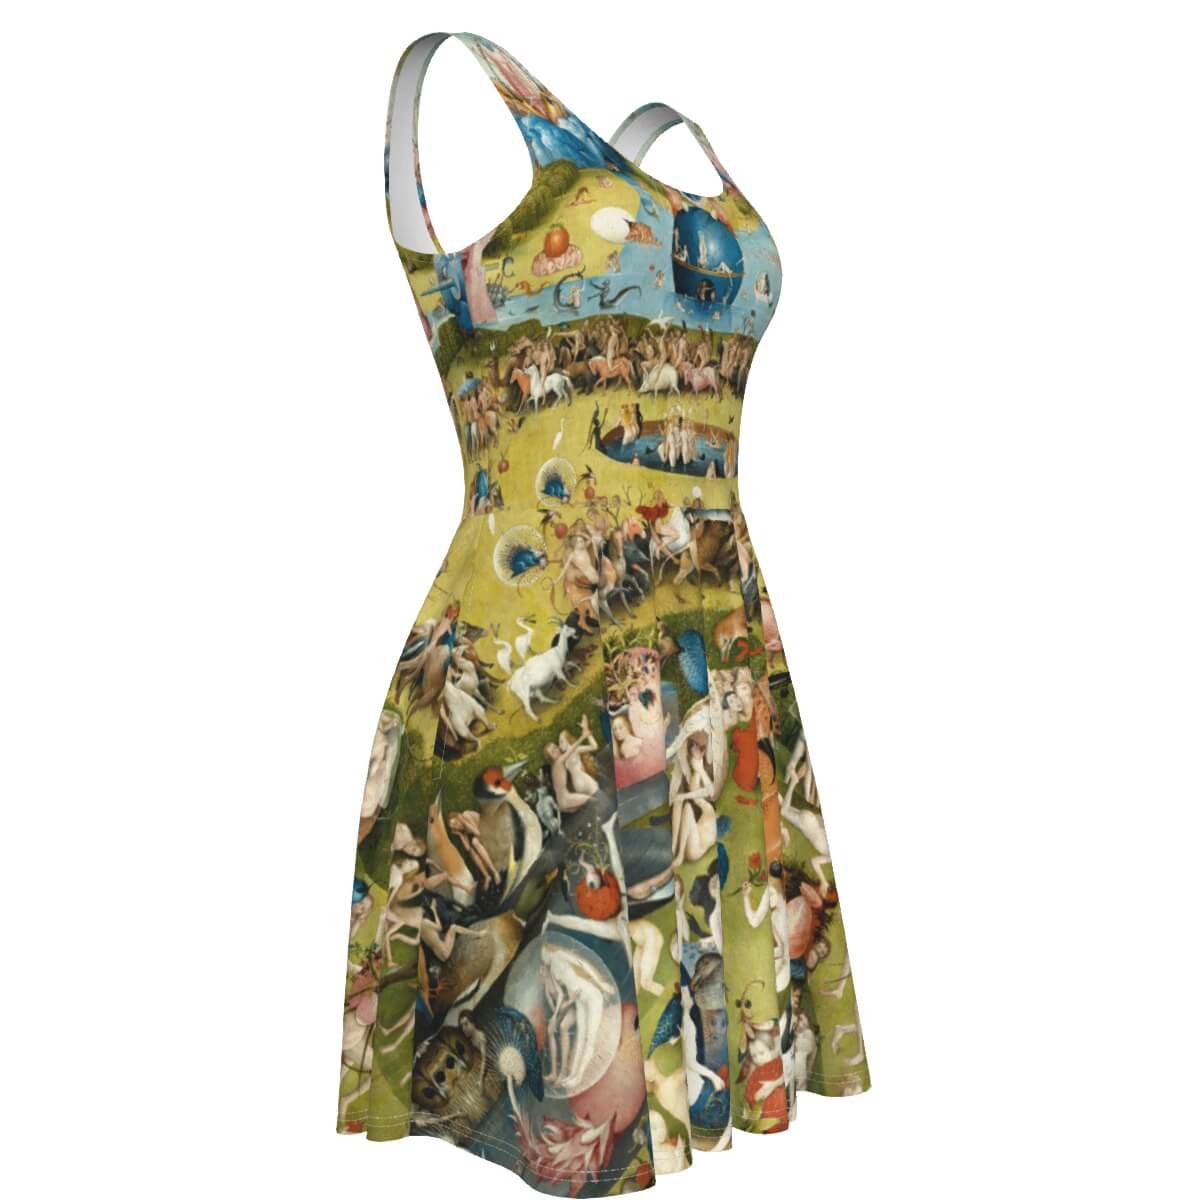 Unique Wearable Art Inspired by Bosch